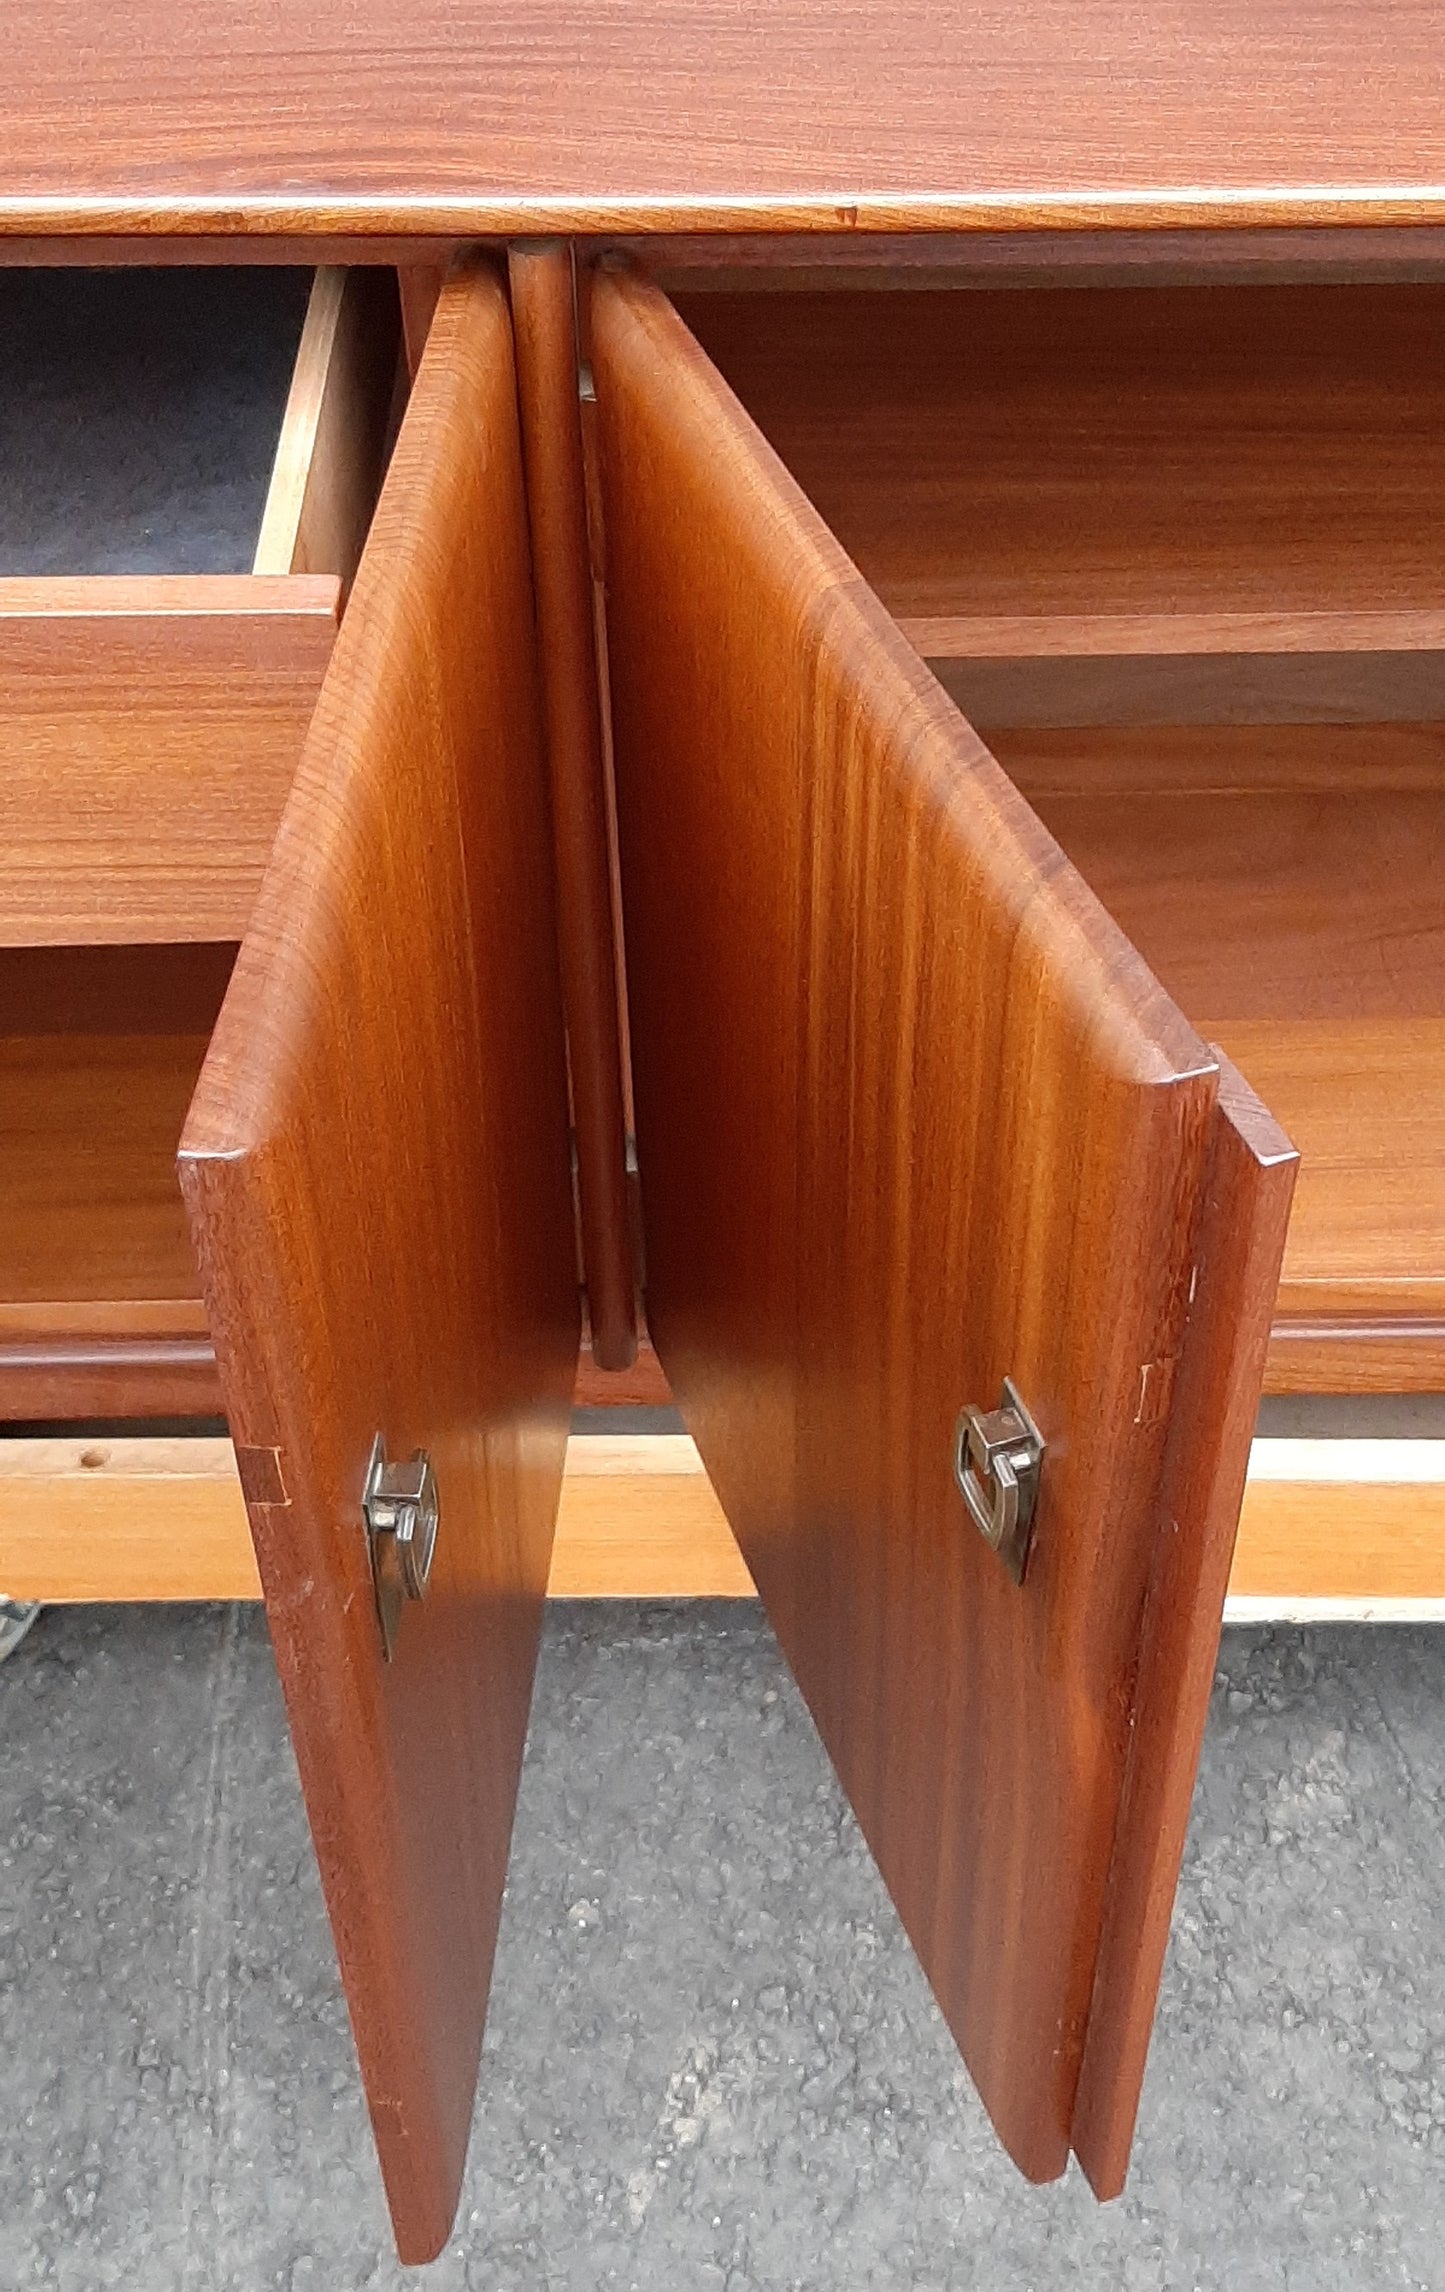 REFINISHED MCM  SOLID TEAK Sideboard TV Media Console by Imperial 66" , PERFECT - Mid Century Modern Toronto